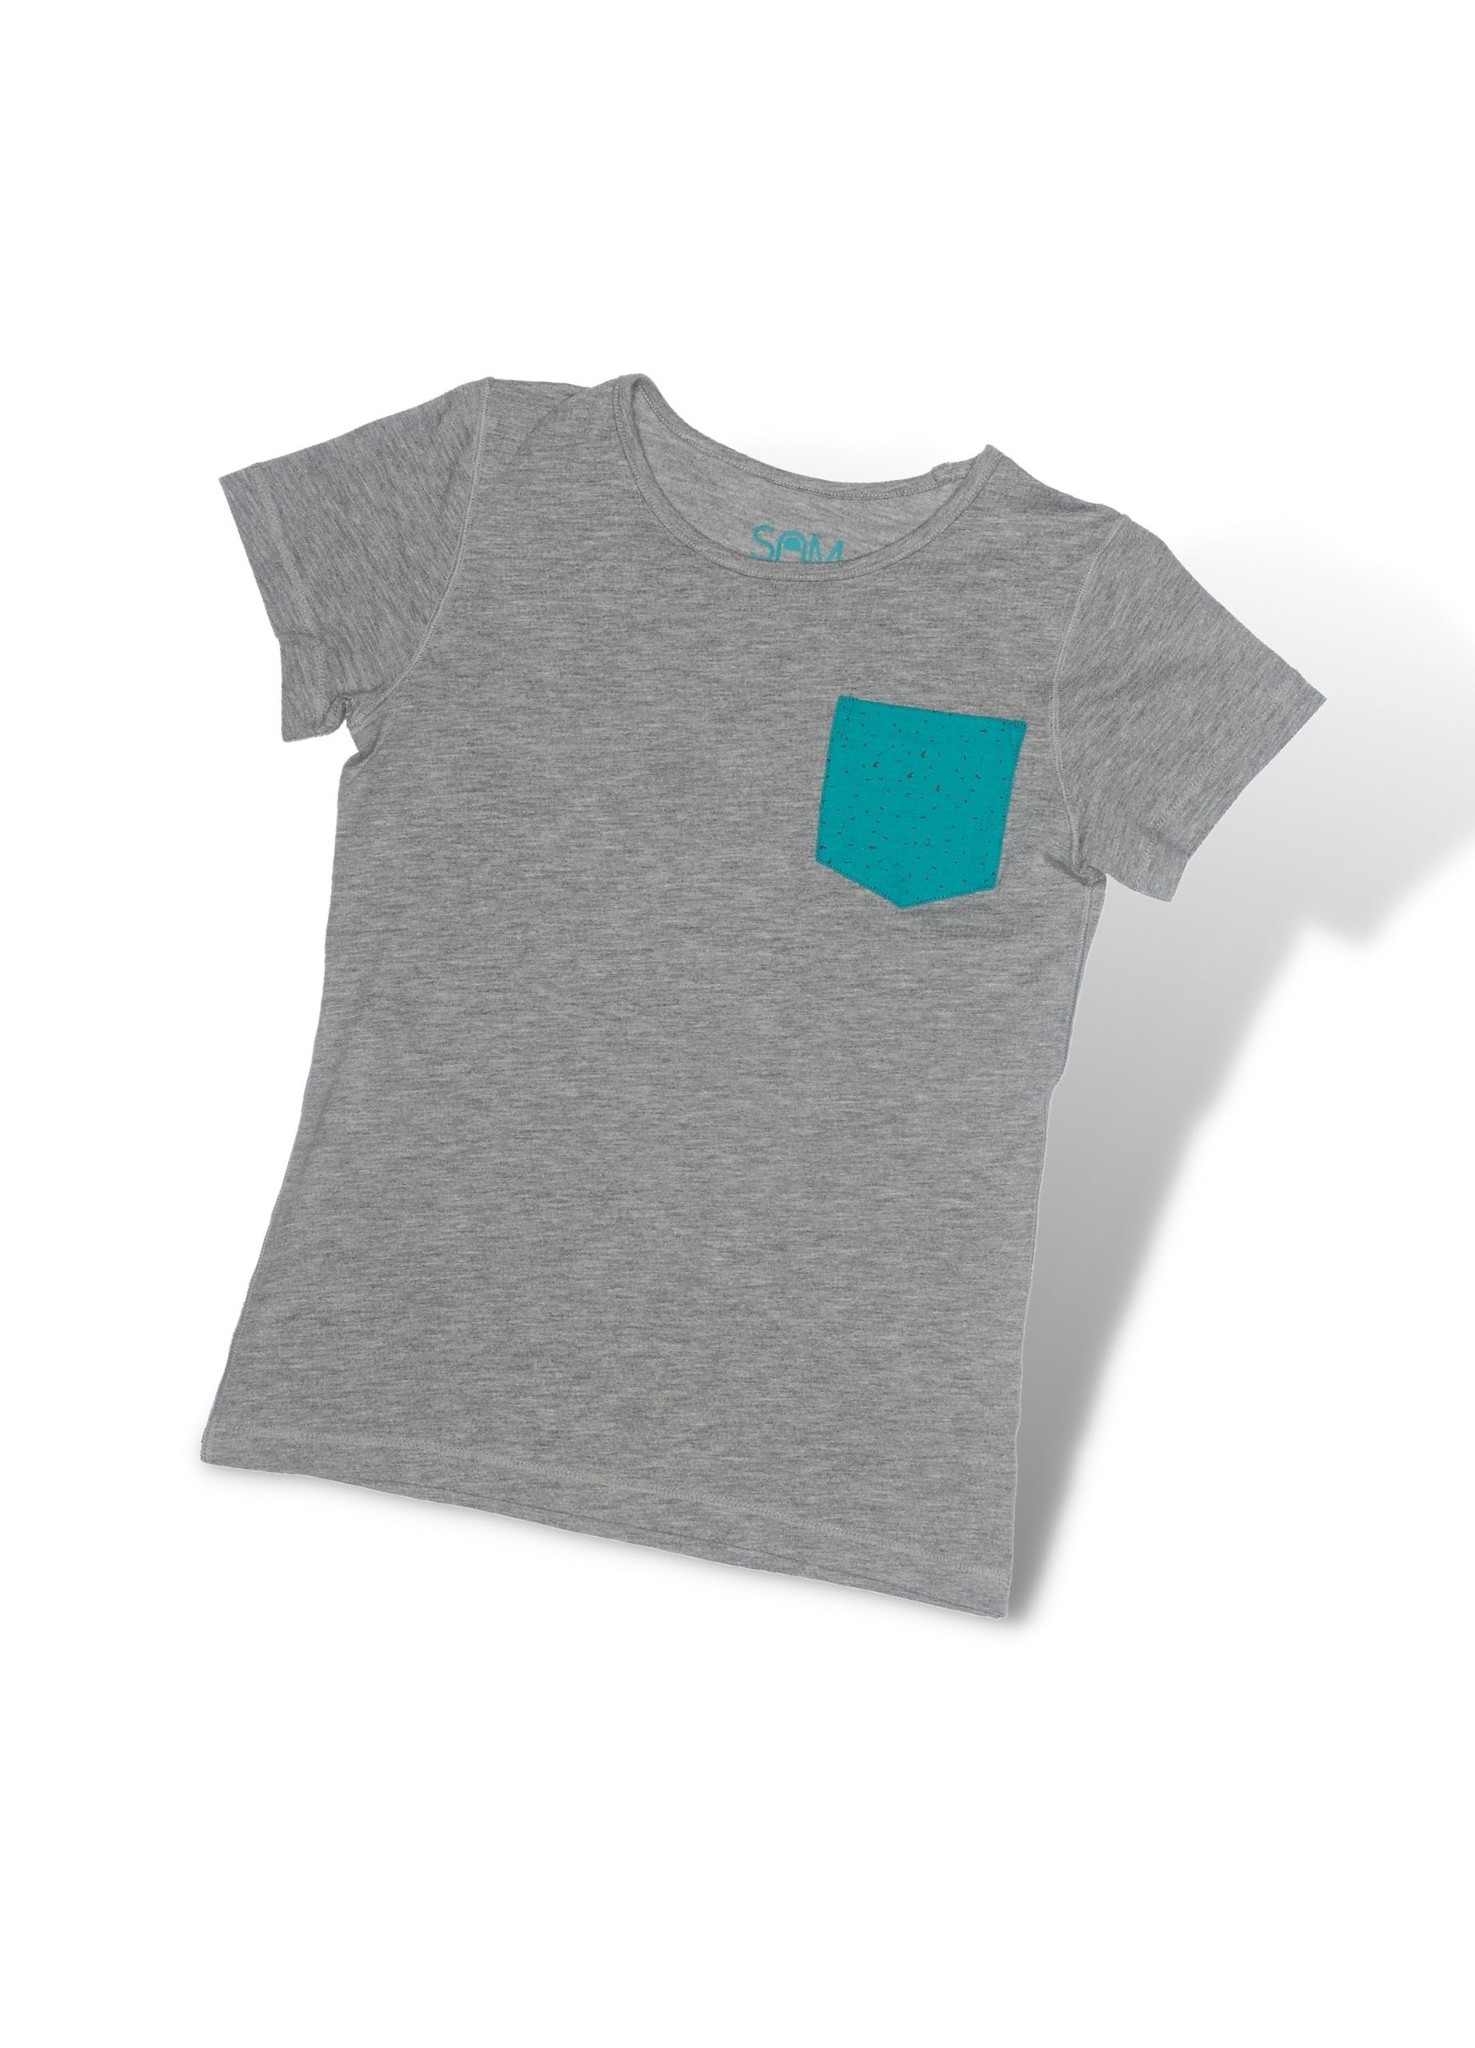 Super soft T-shirt, without tangible seams or labels. Organic